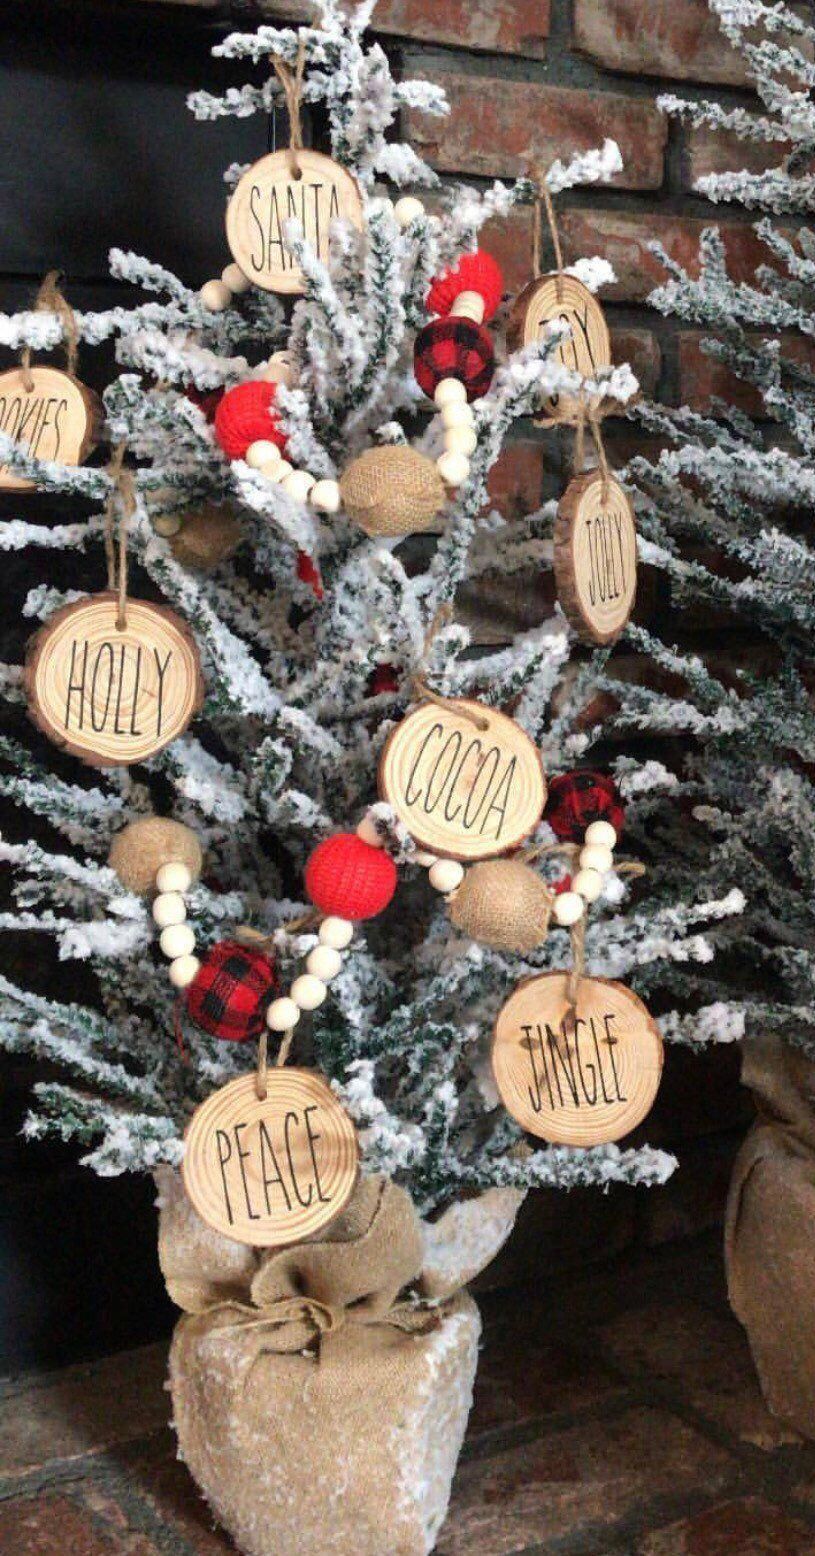 Rae dunn inspired christmas ornaments, gift, wood slice ornaments -   19 diy Christmas projects ideas